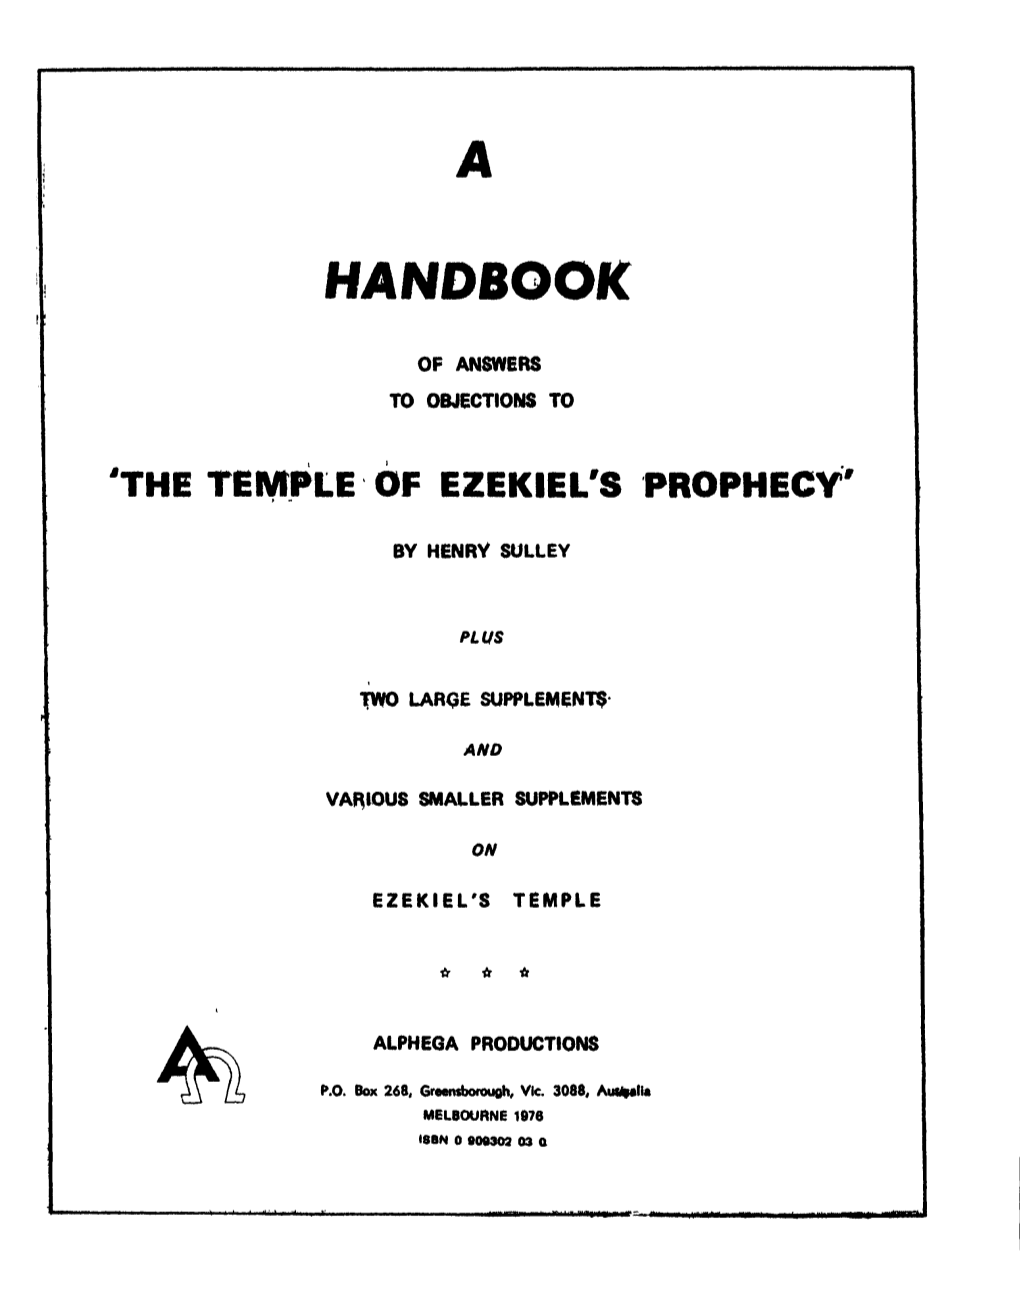 A Handbook of Answers to Objections to the Temple Of